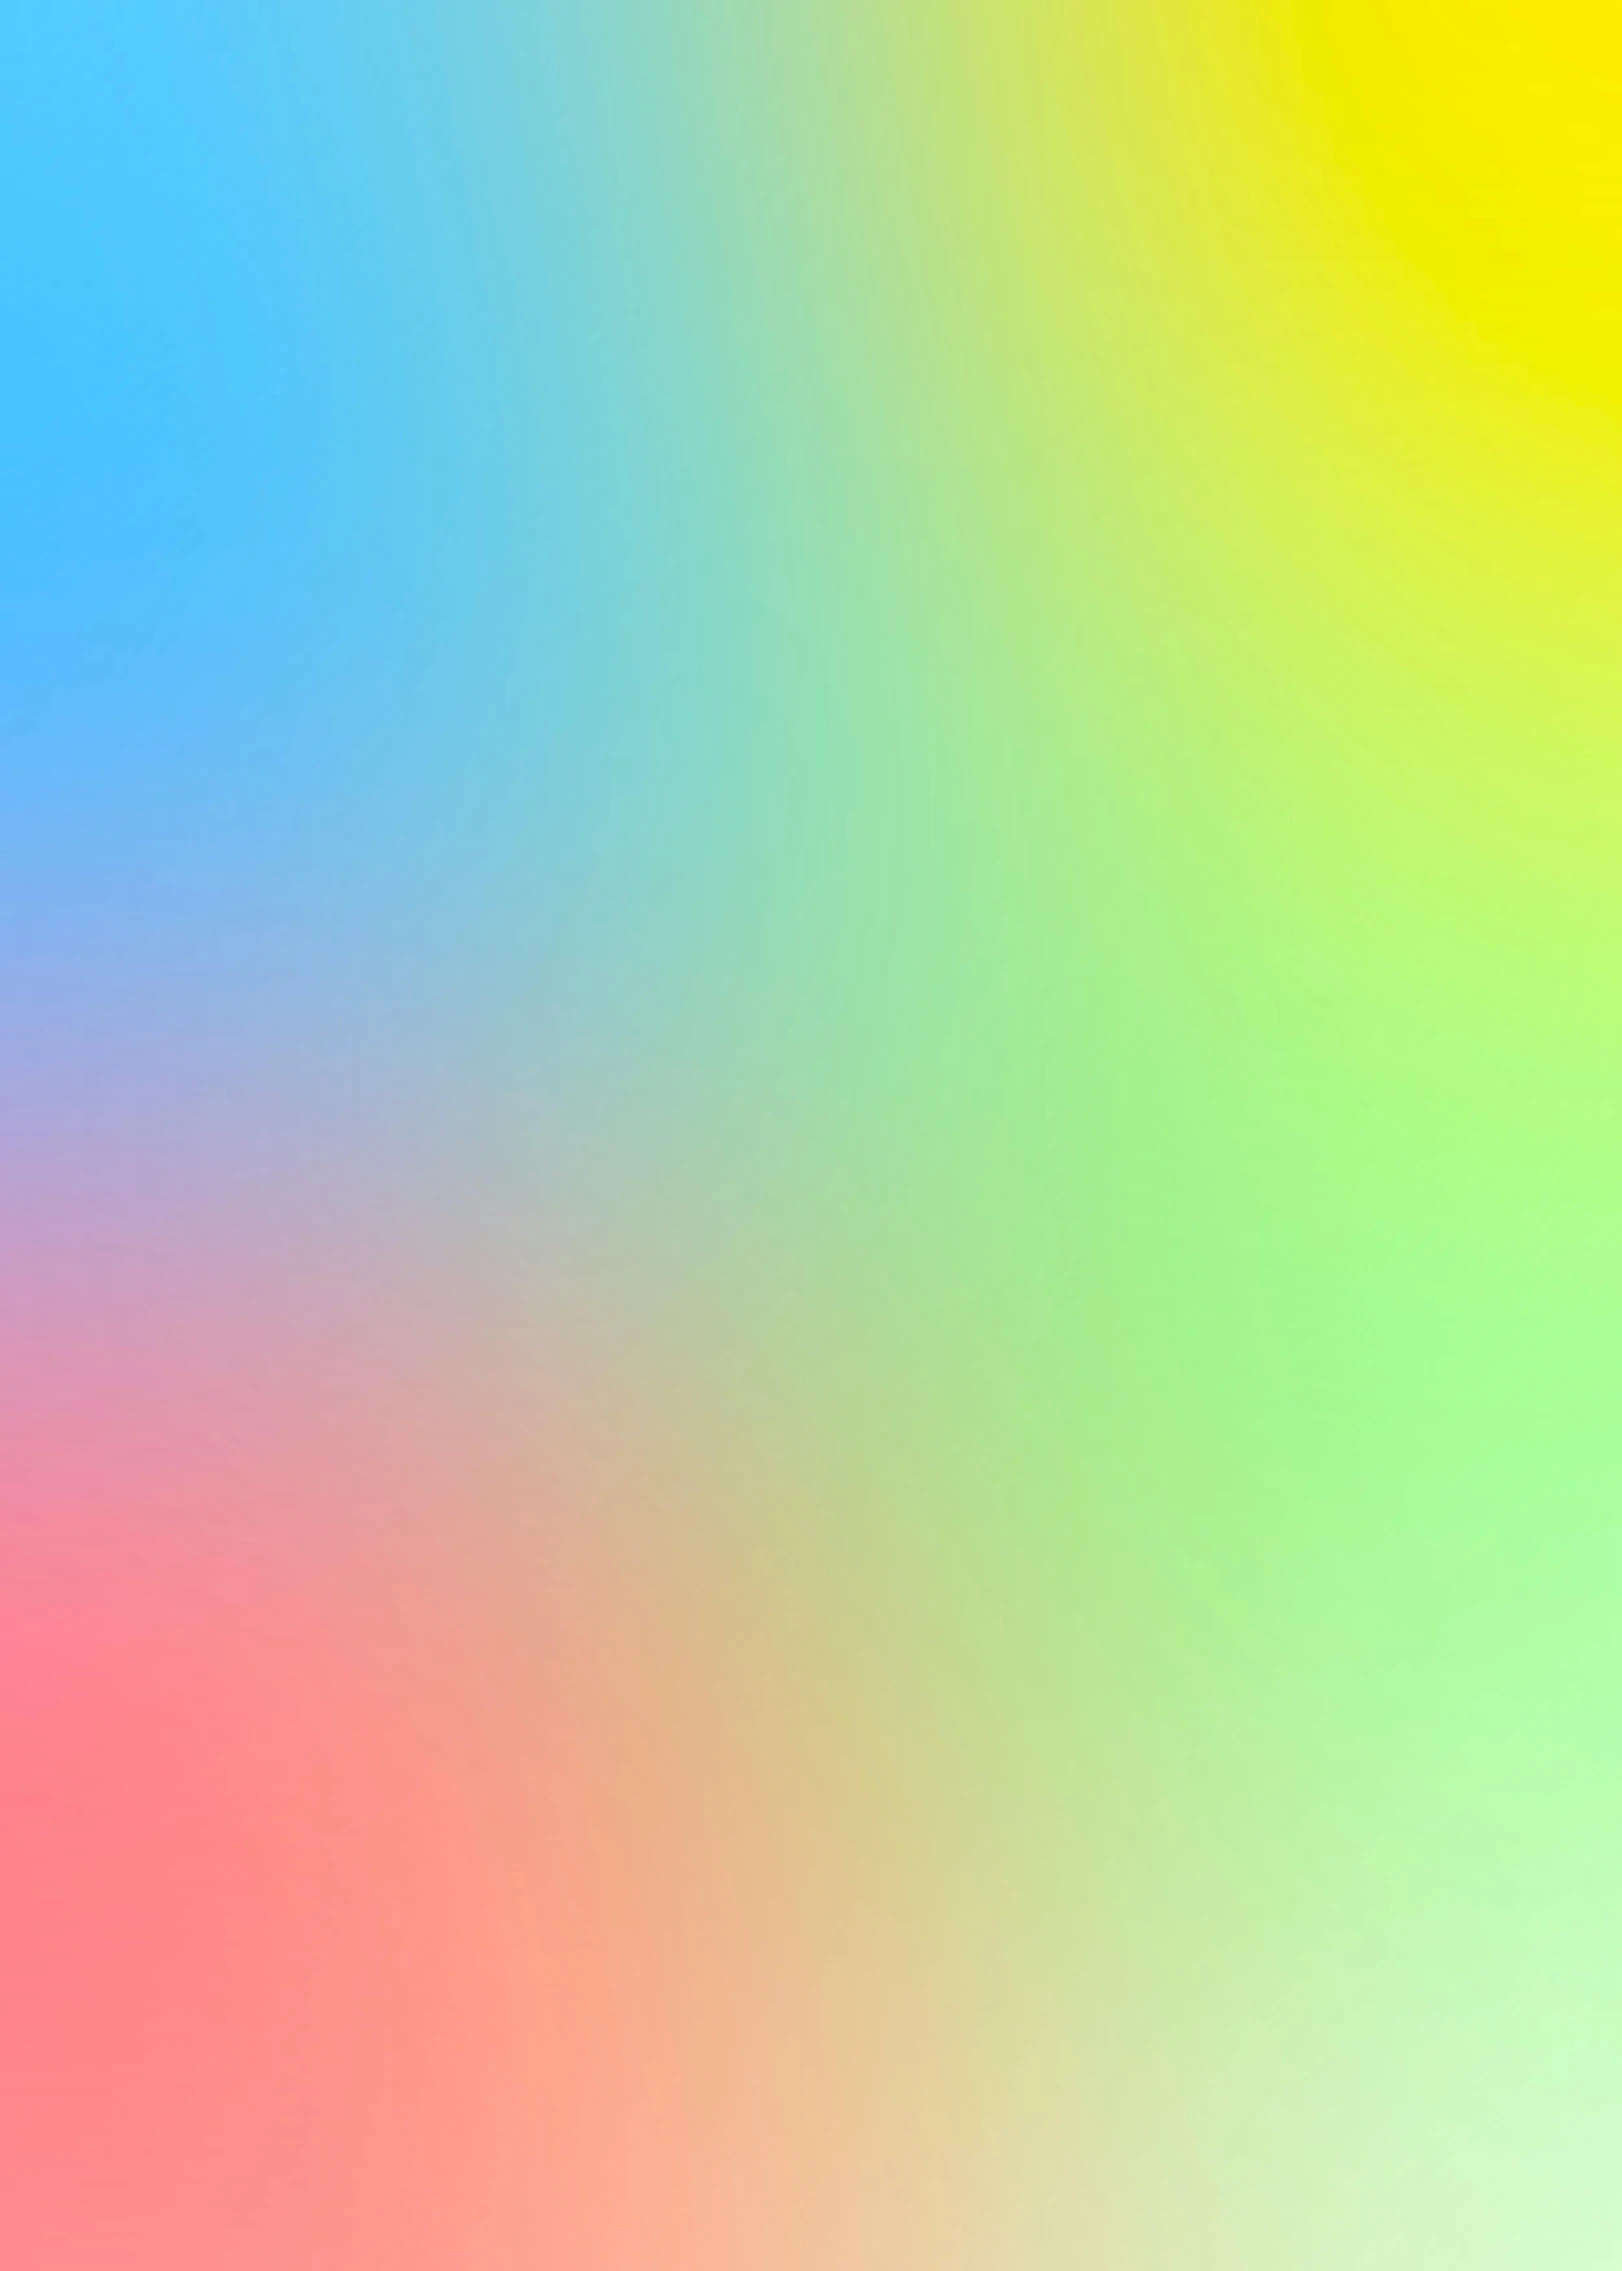 this is an image of a rainbow background